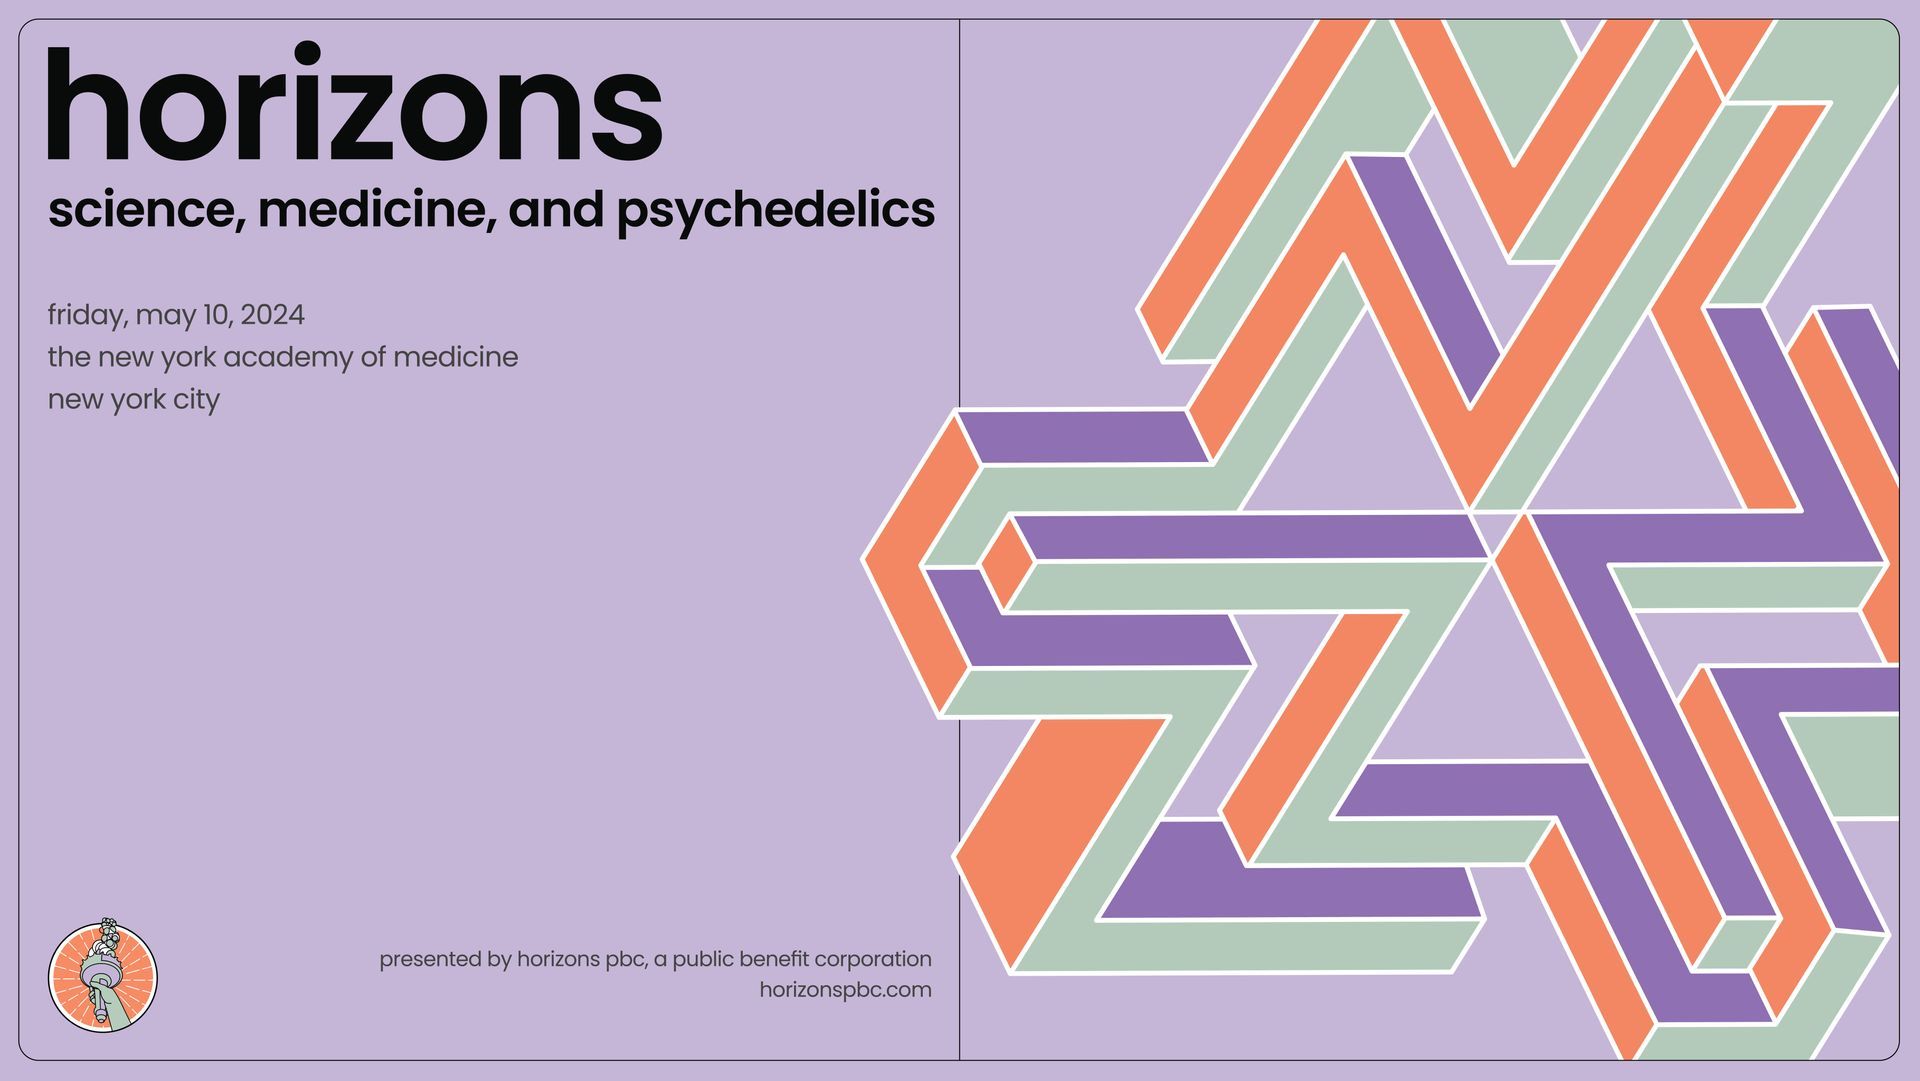 A poster for horizons science medicine and psychedelics